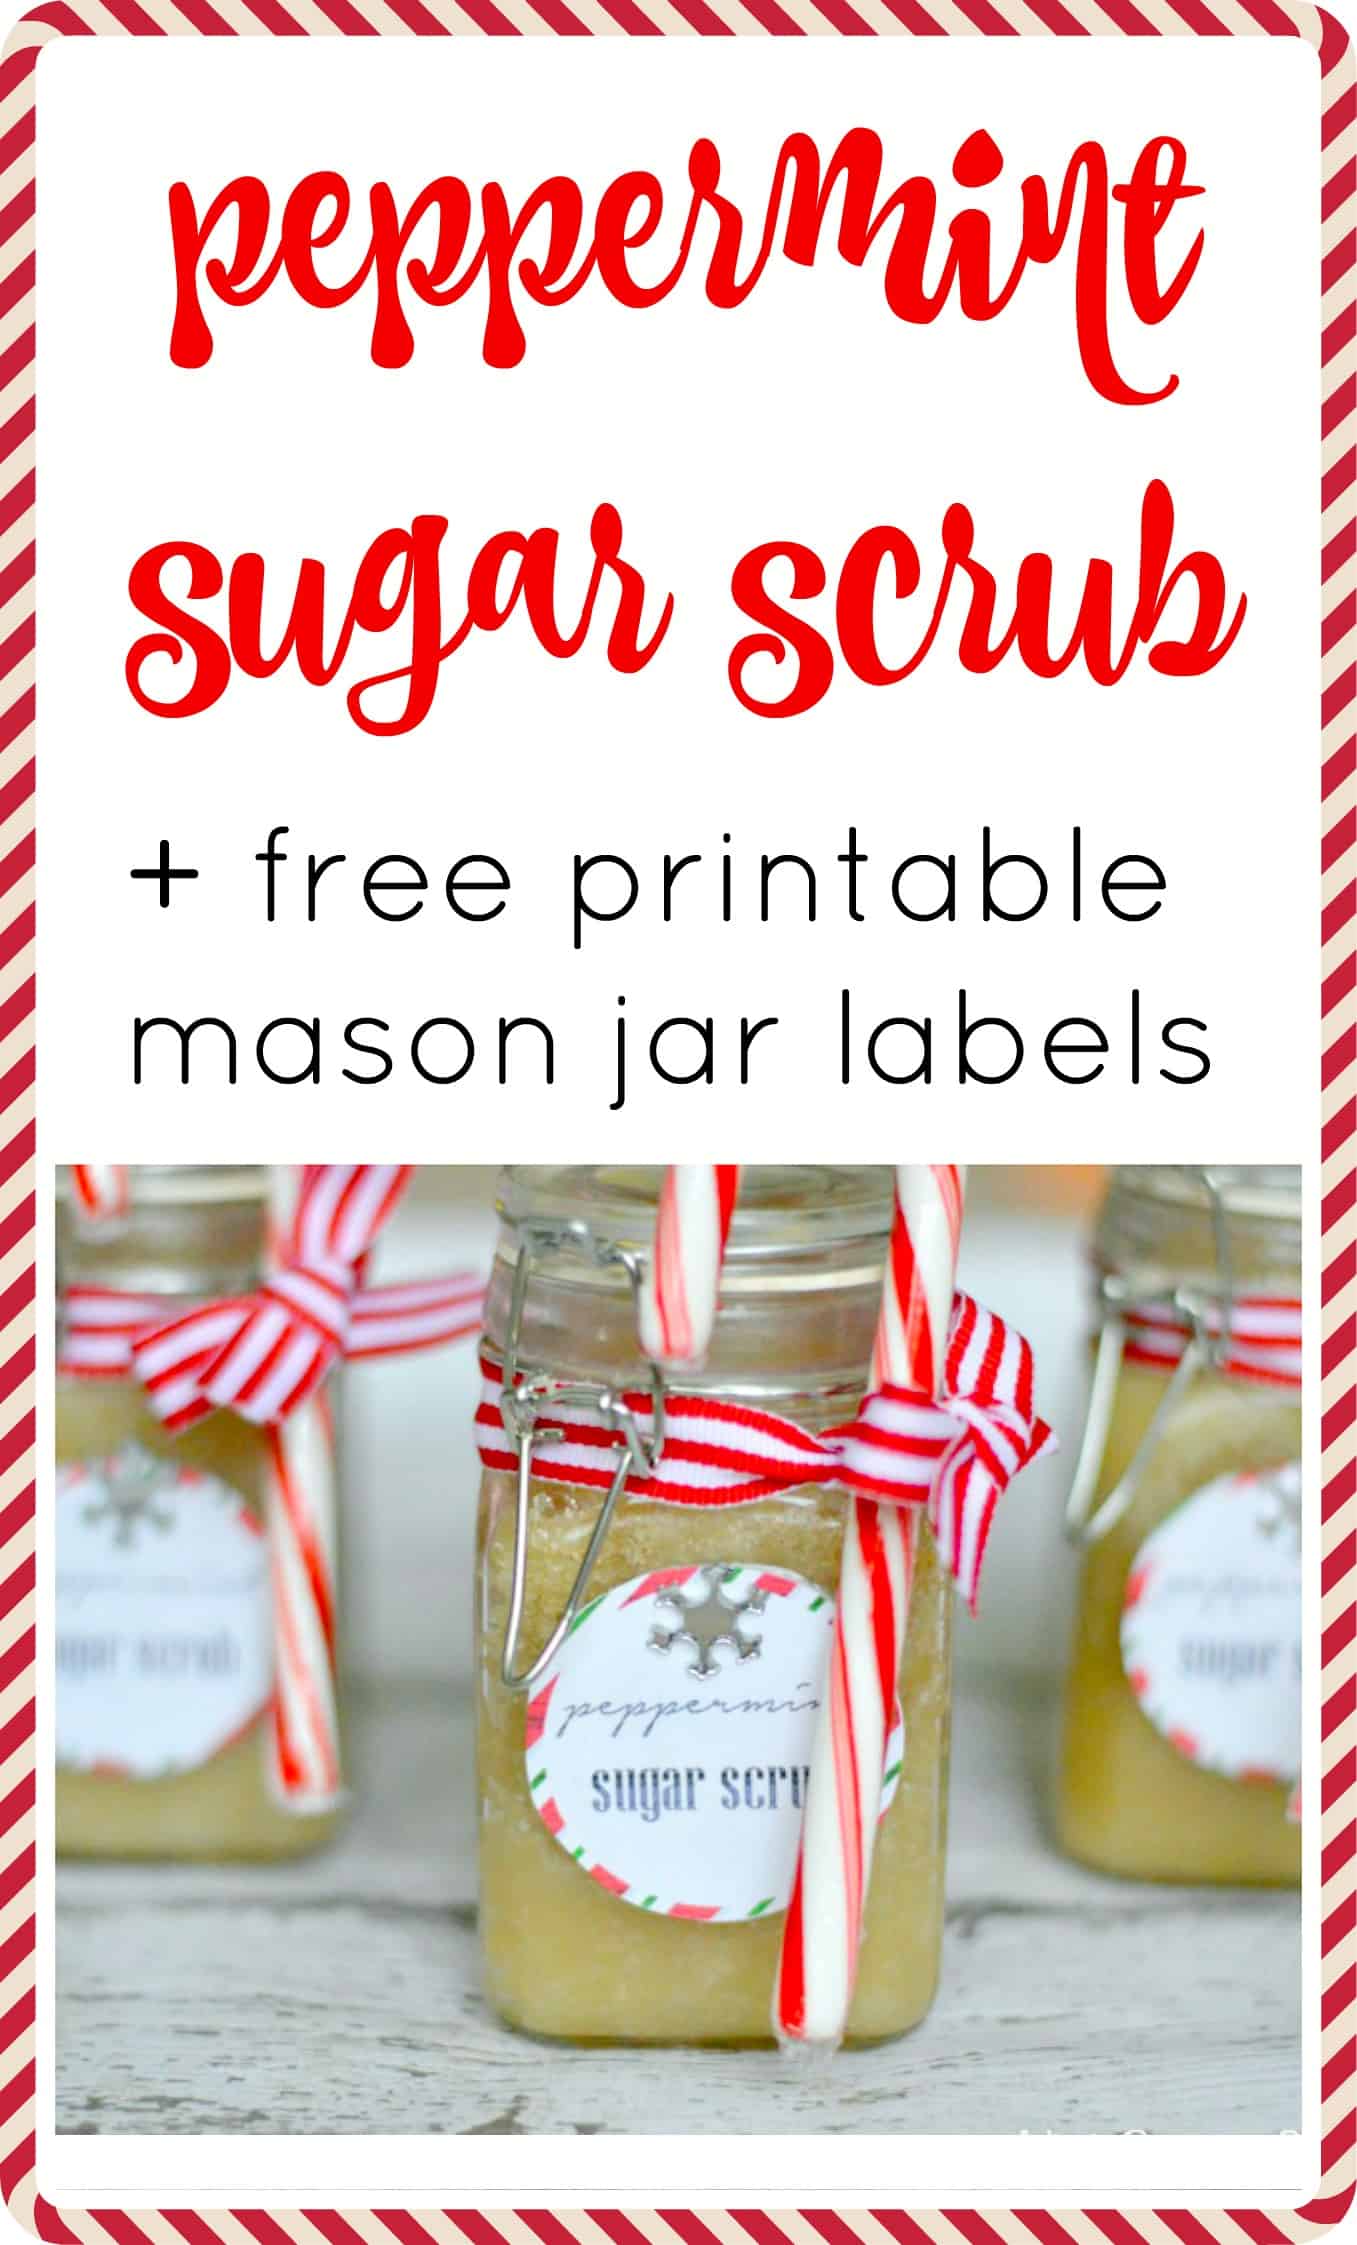 Peppermint sugar scrub and free printable mason jar labels, with a group of decorated glass jars below